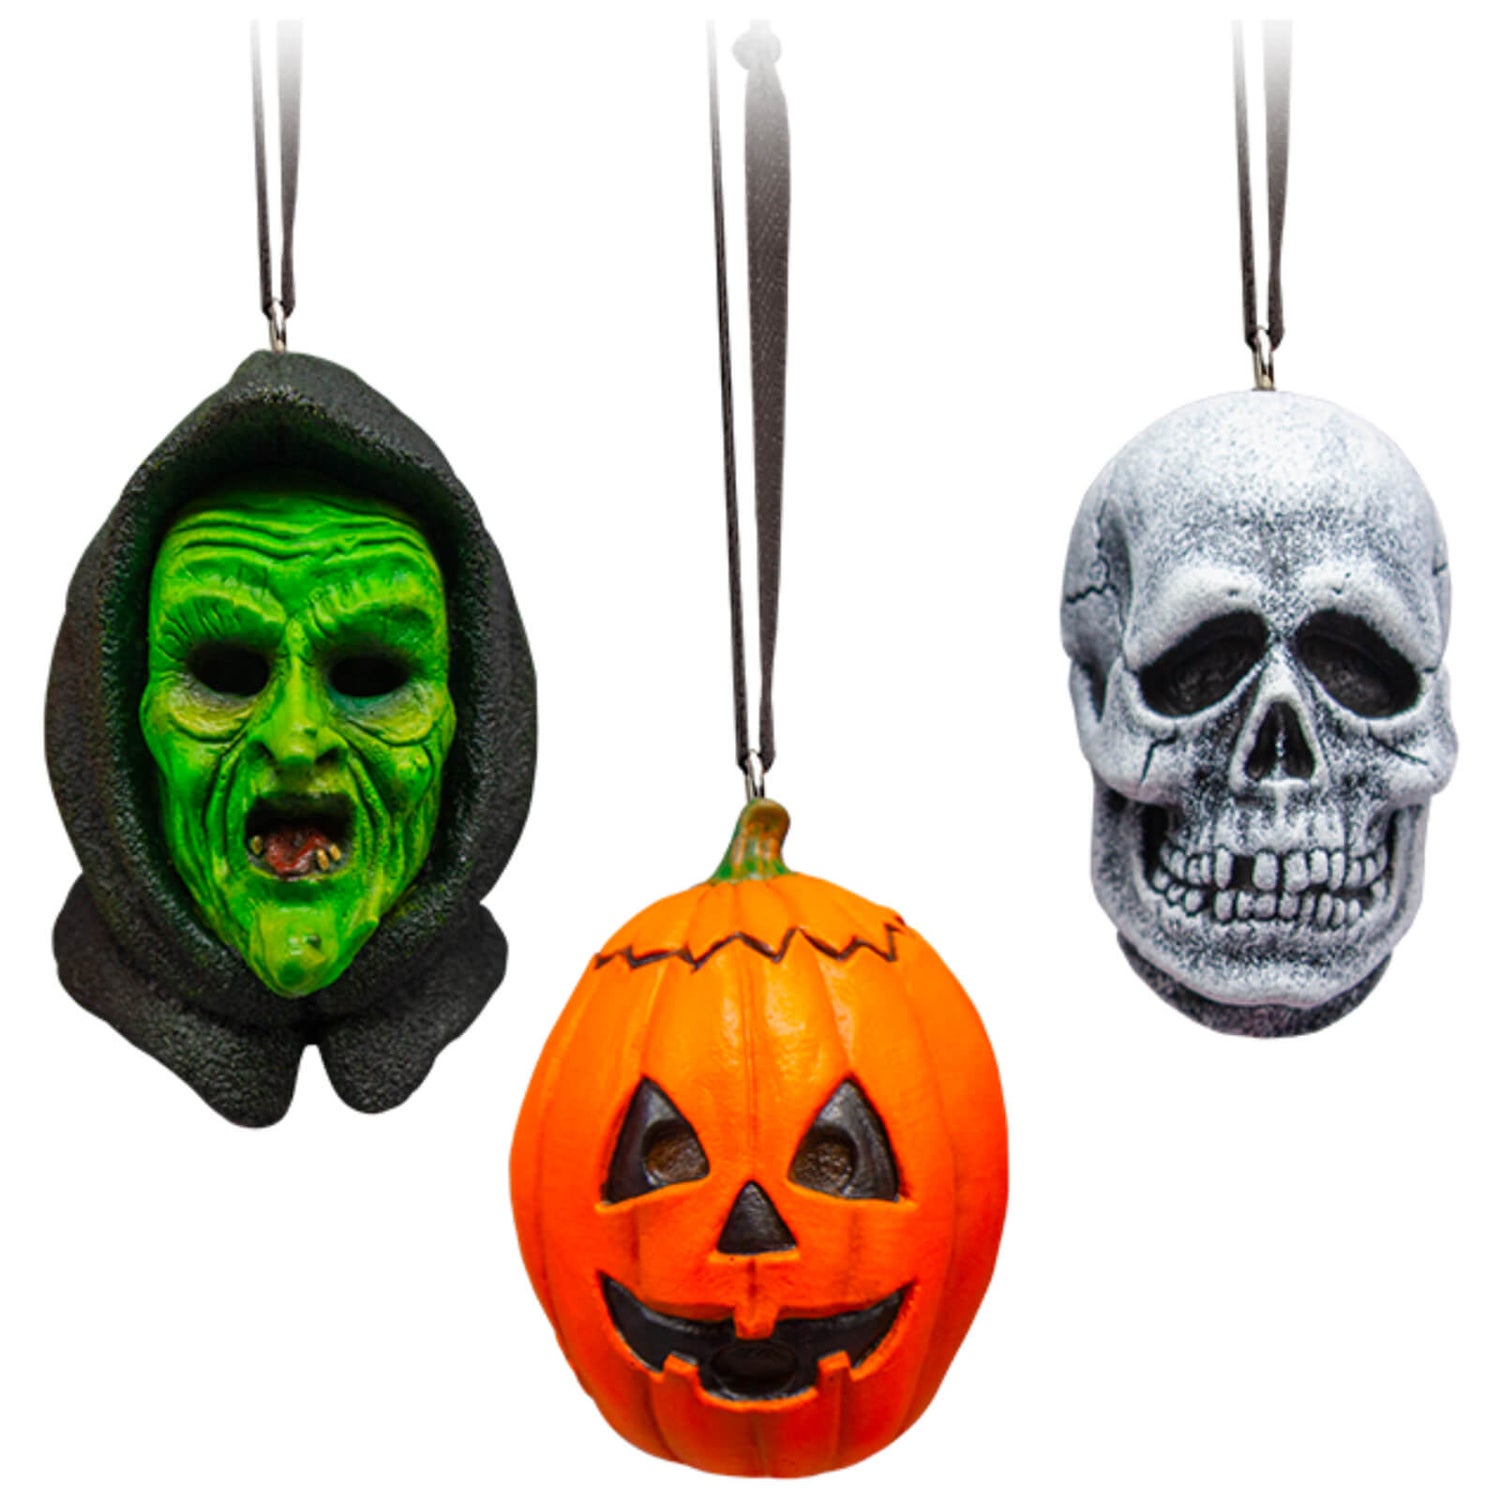 Trick or Treat Studios Halloween III: Season of the Witch 3 Mask Holiday Horrors Ornament Set